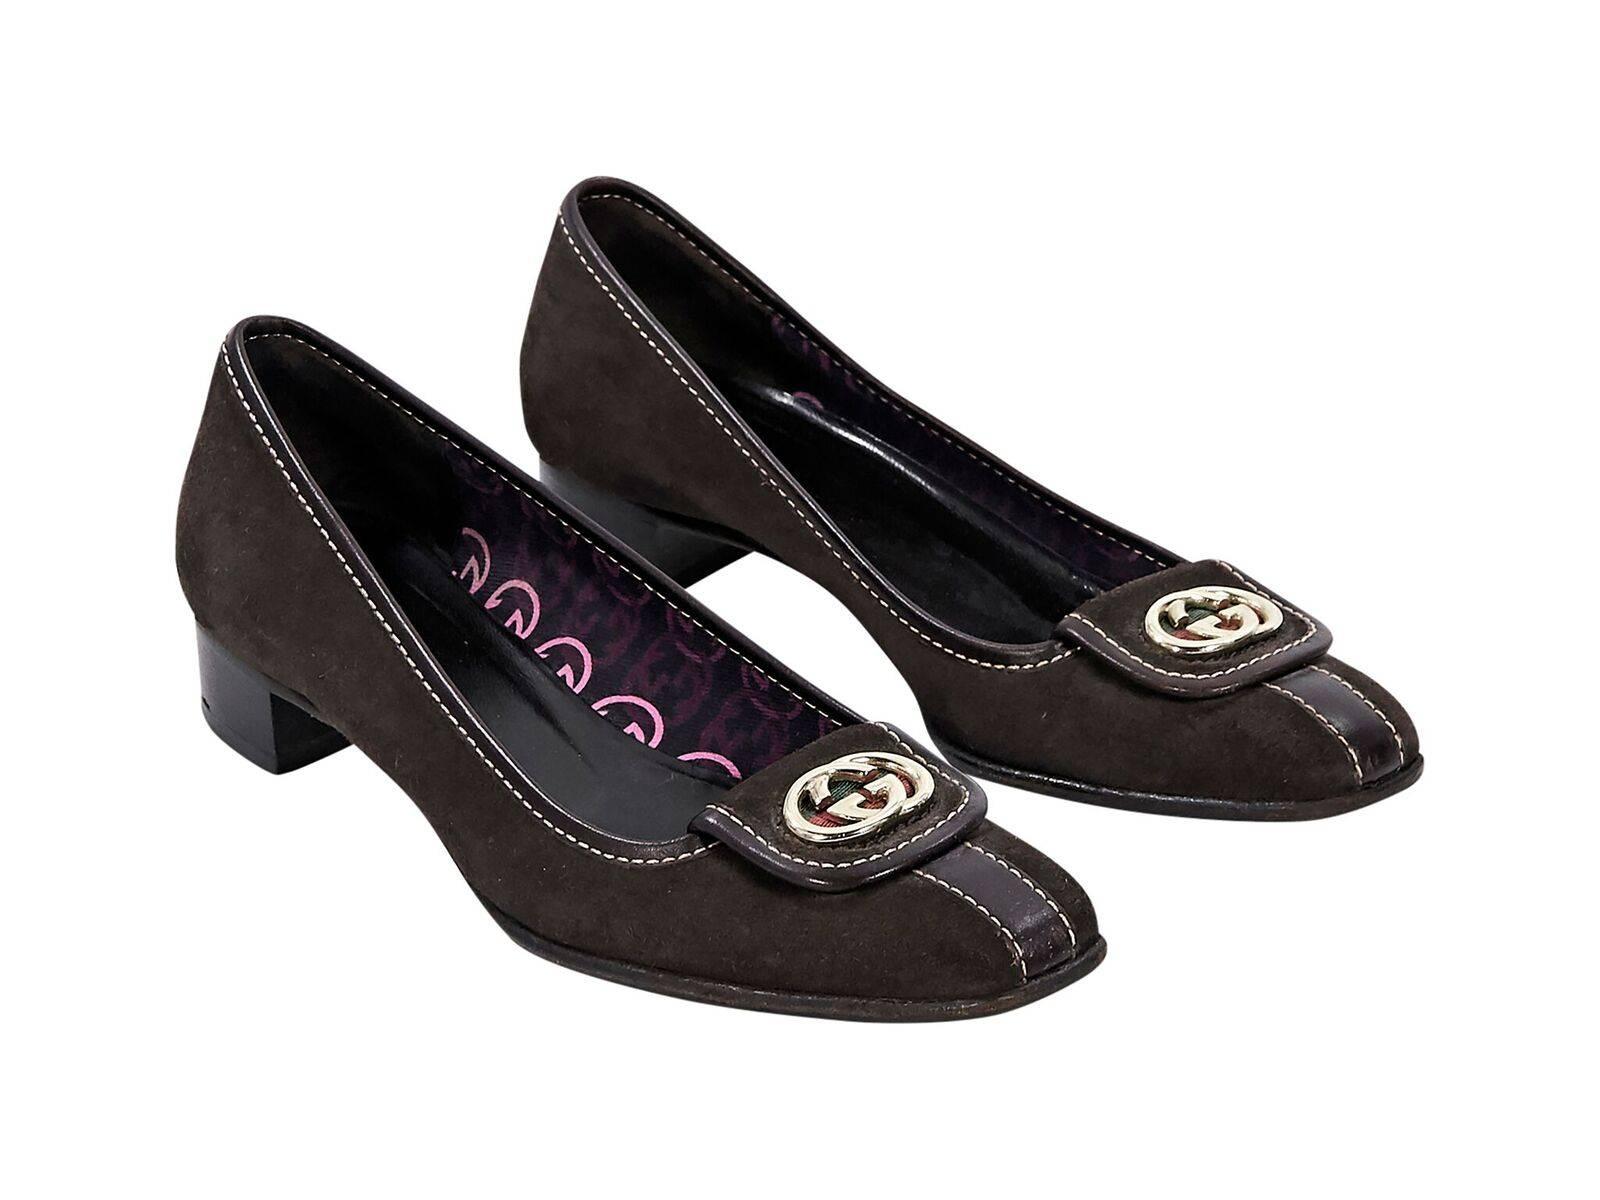 Product details:  Brown suede loafers by Gucci.  Trimmed with leather.  Logo detail accents vamp.  Low stacked kitten heel.  Slip-on style.  Goldtone hardware.  
Condition: Pre-owned. Very good. 
Est. Retail $795